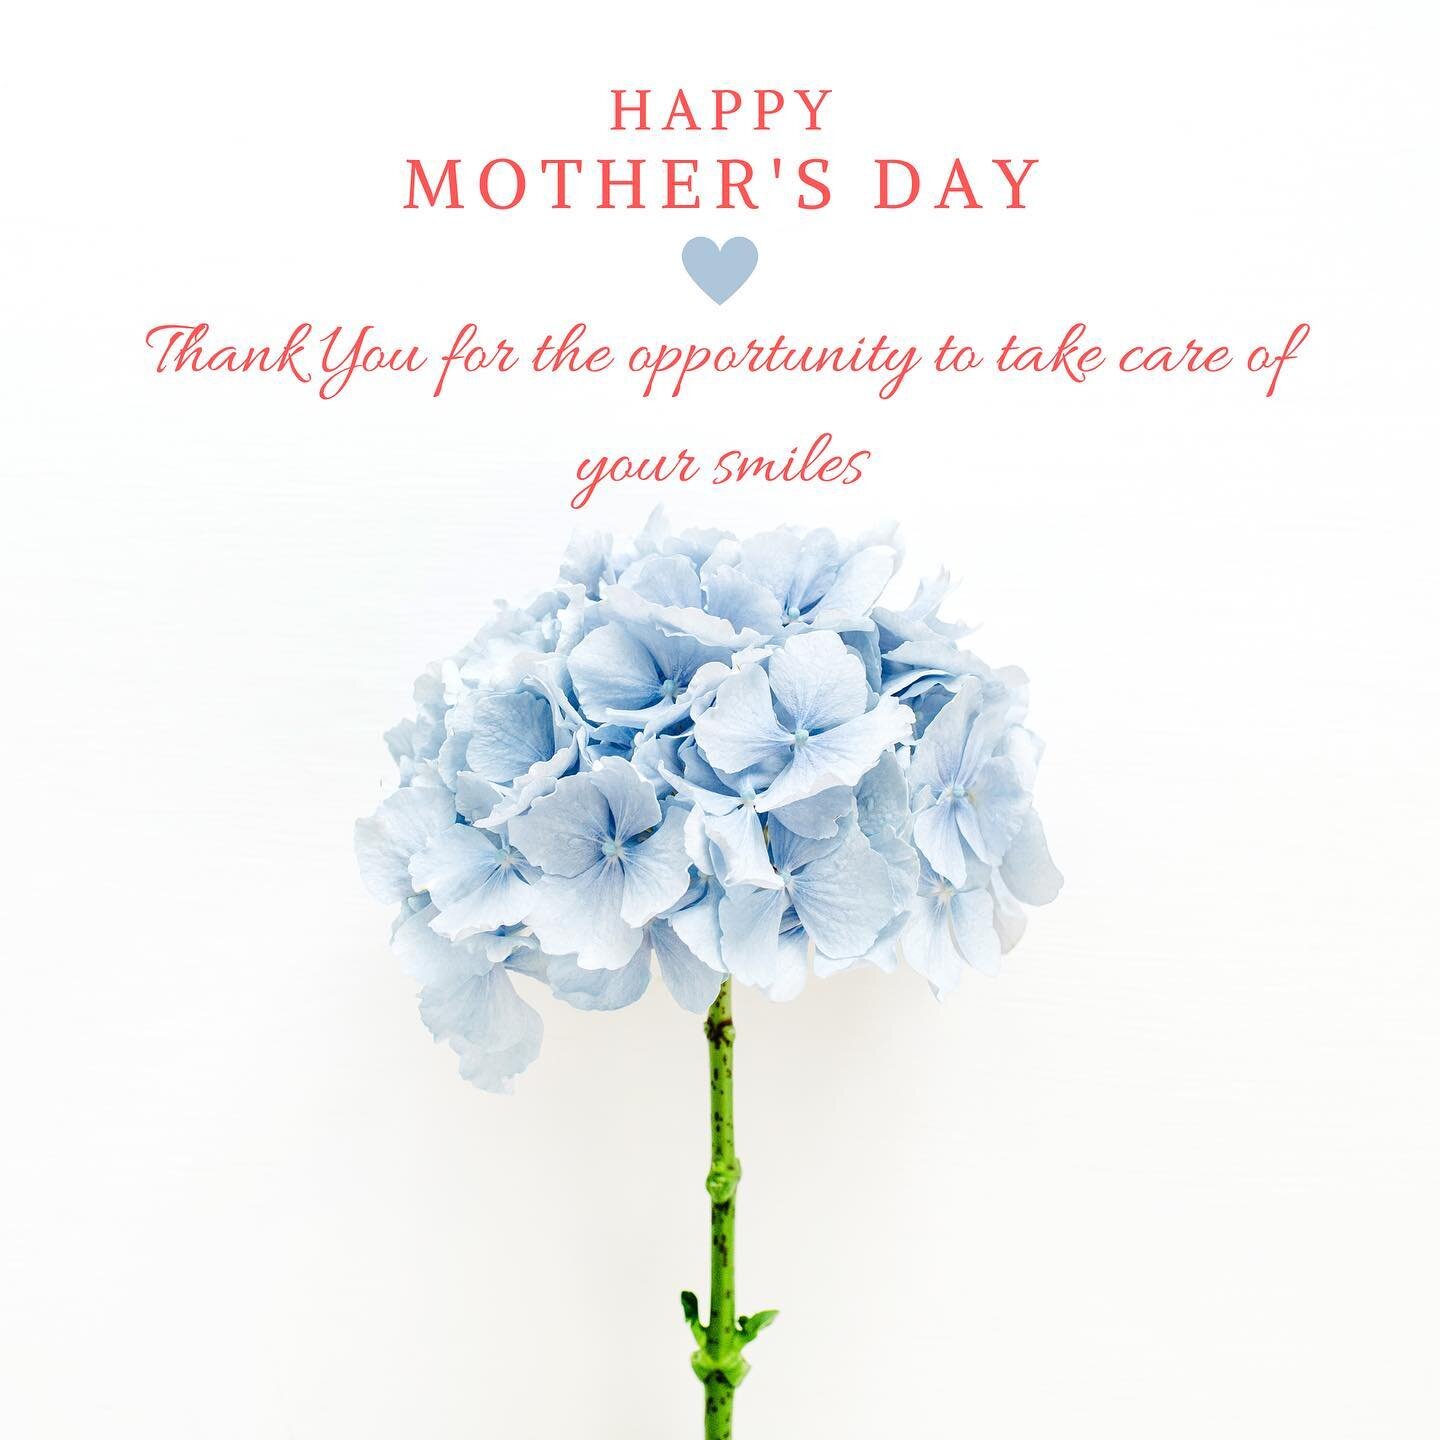 Happy Mother&rsquo;s Day to all the moms who make families happen!

#mothersday2023